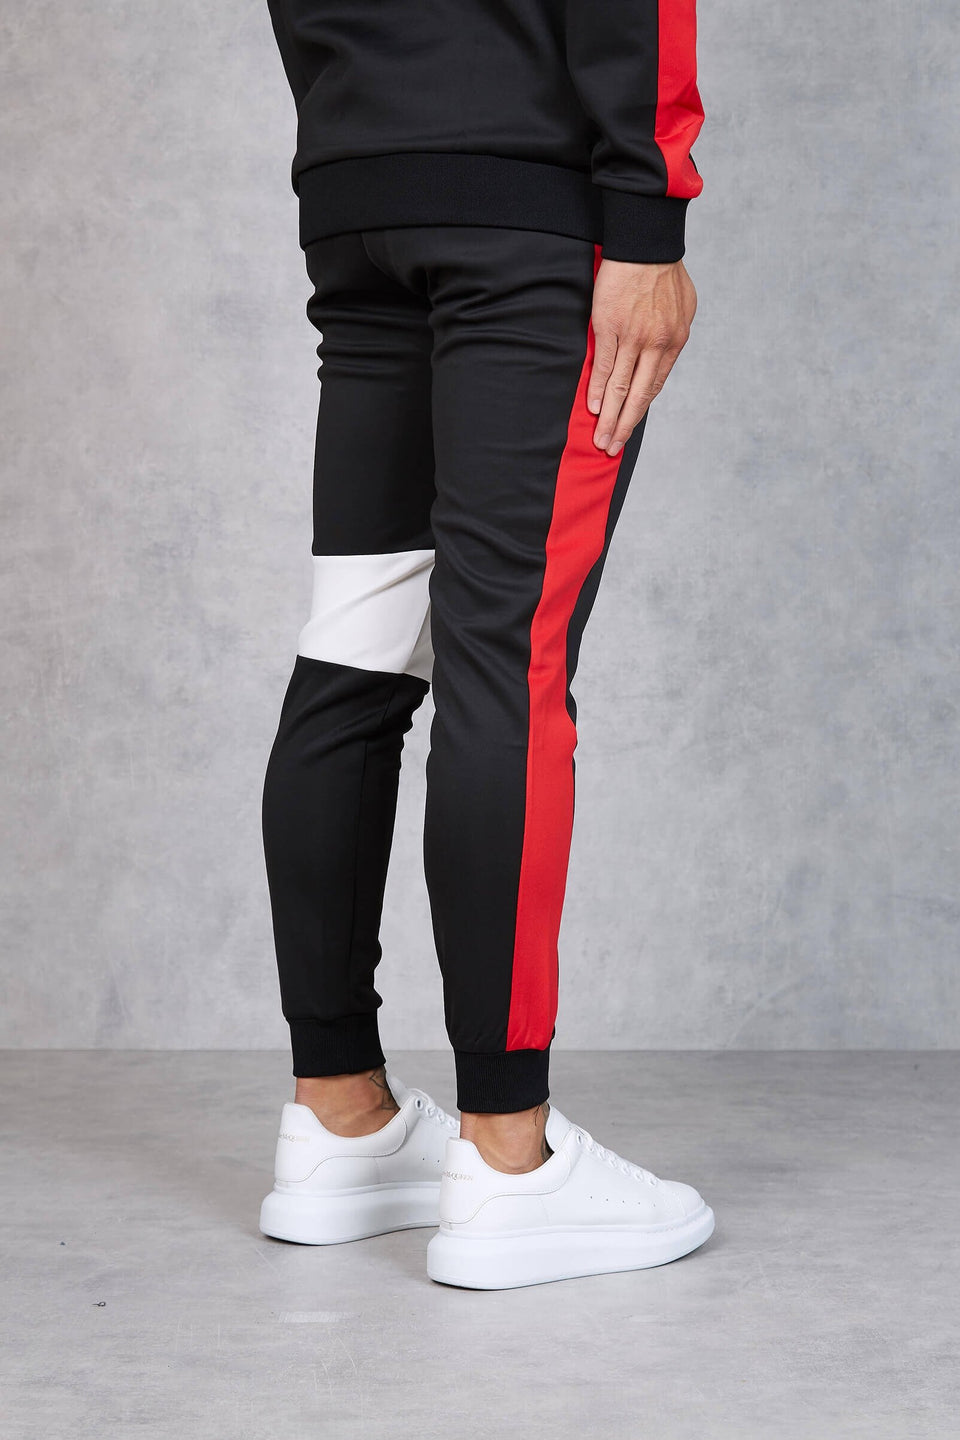 Nuova Contrast Joggers - Black/Red